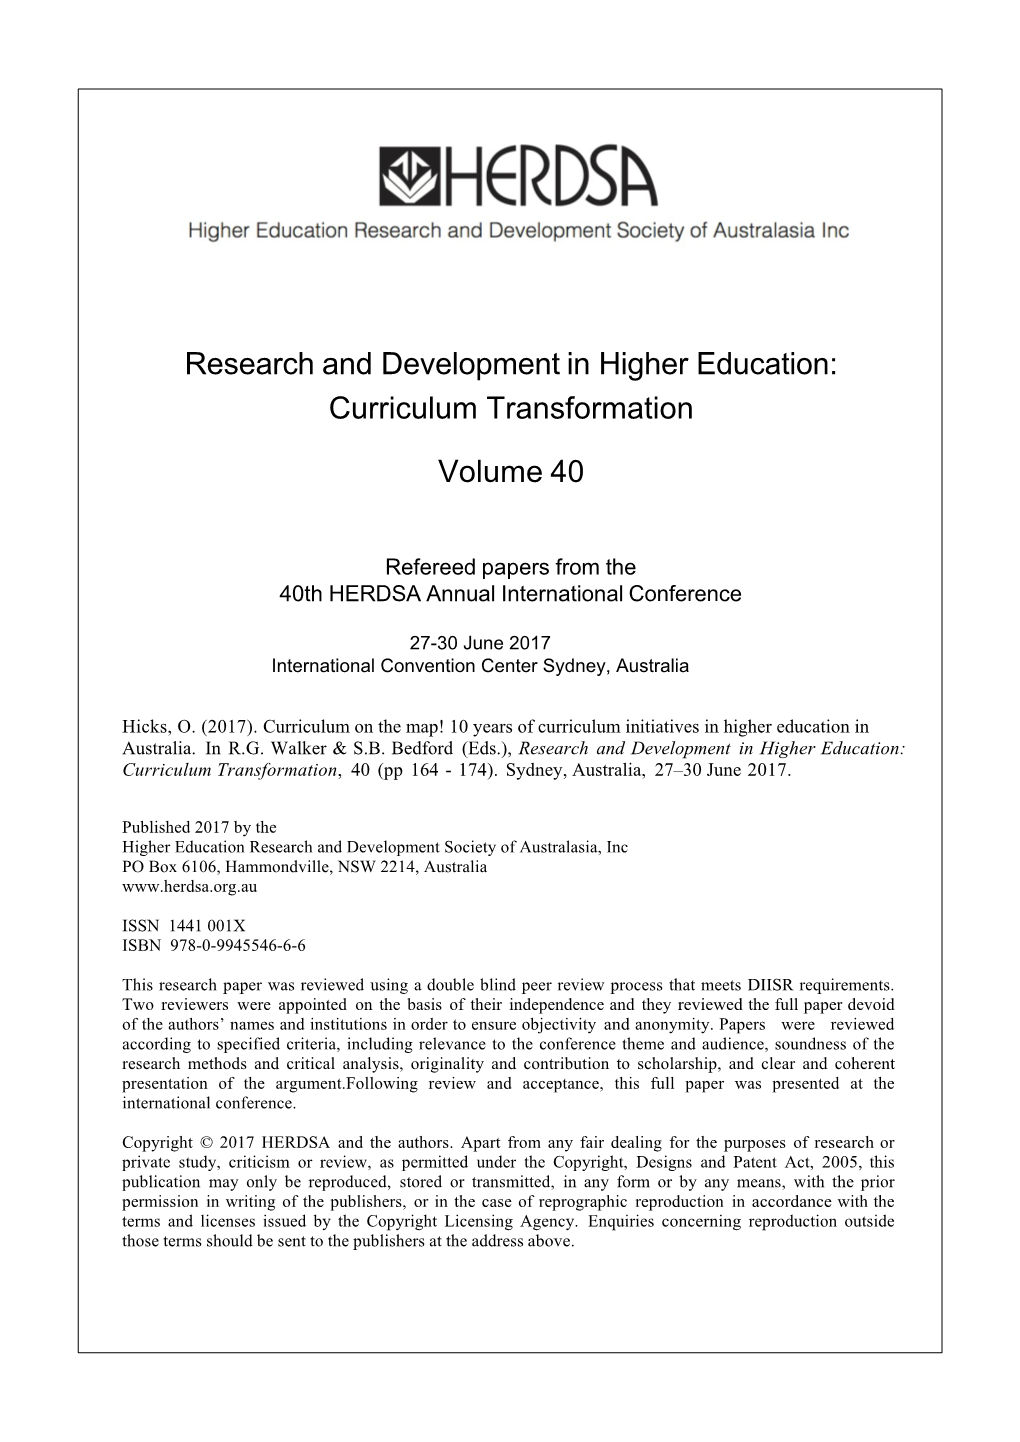 Research and Development in Higher Education: Curriculum Transformation